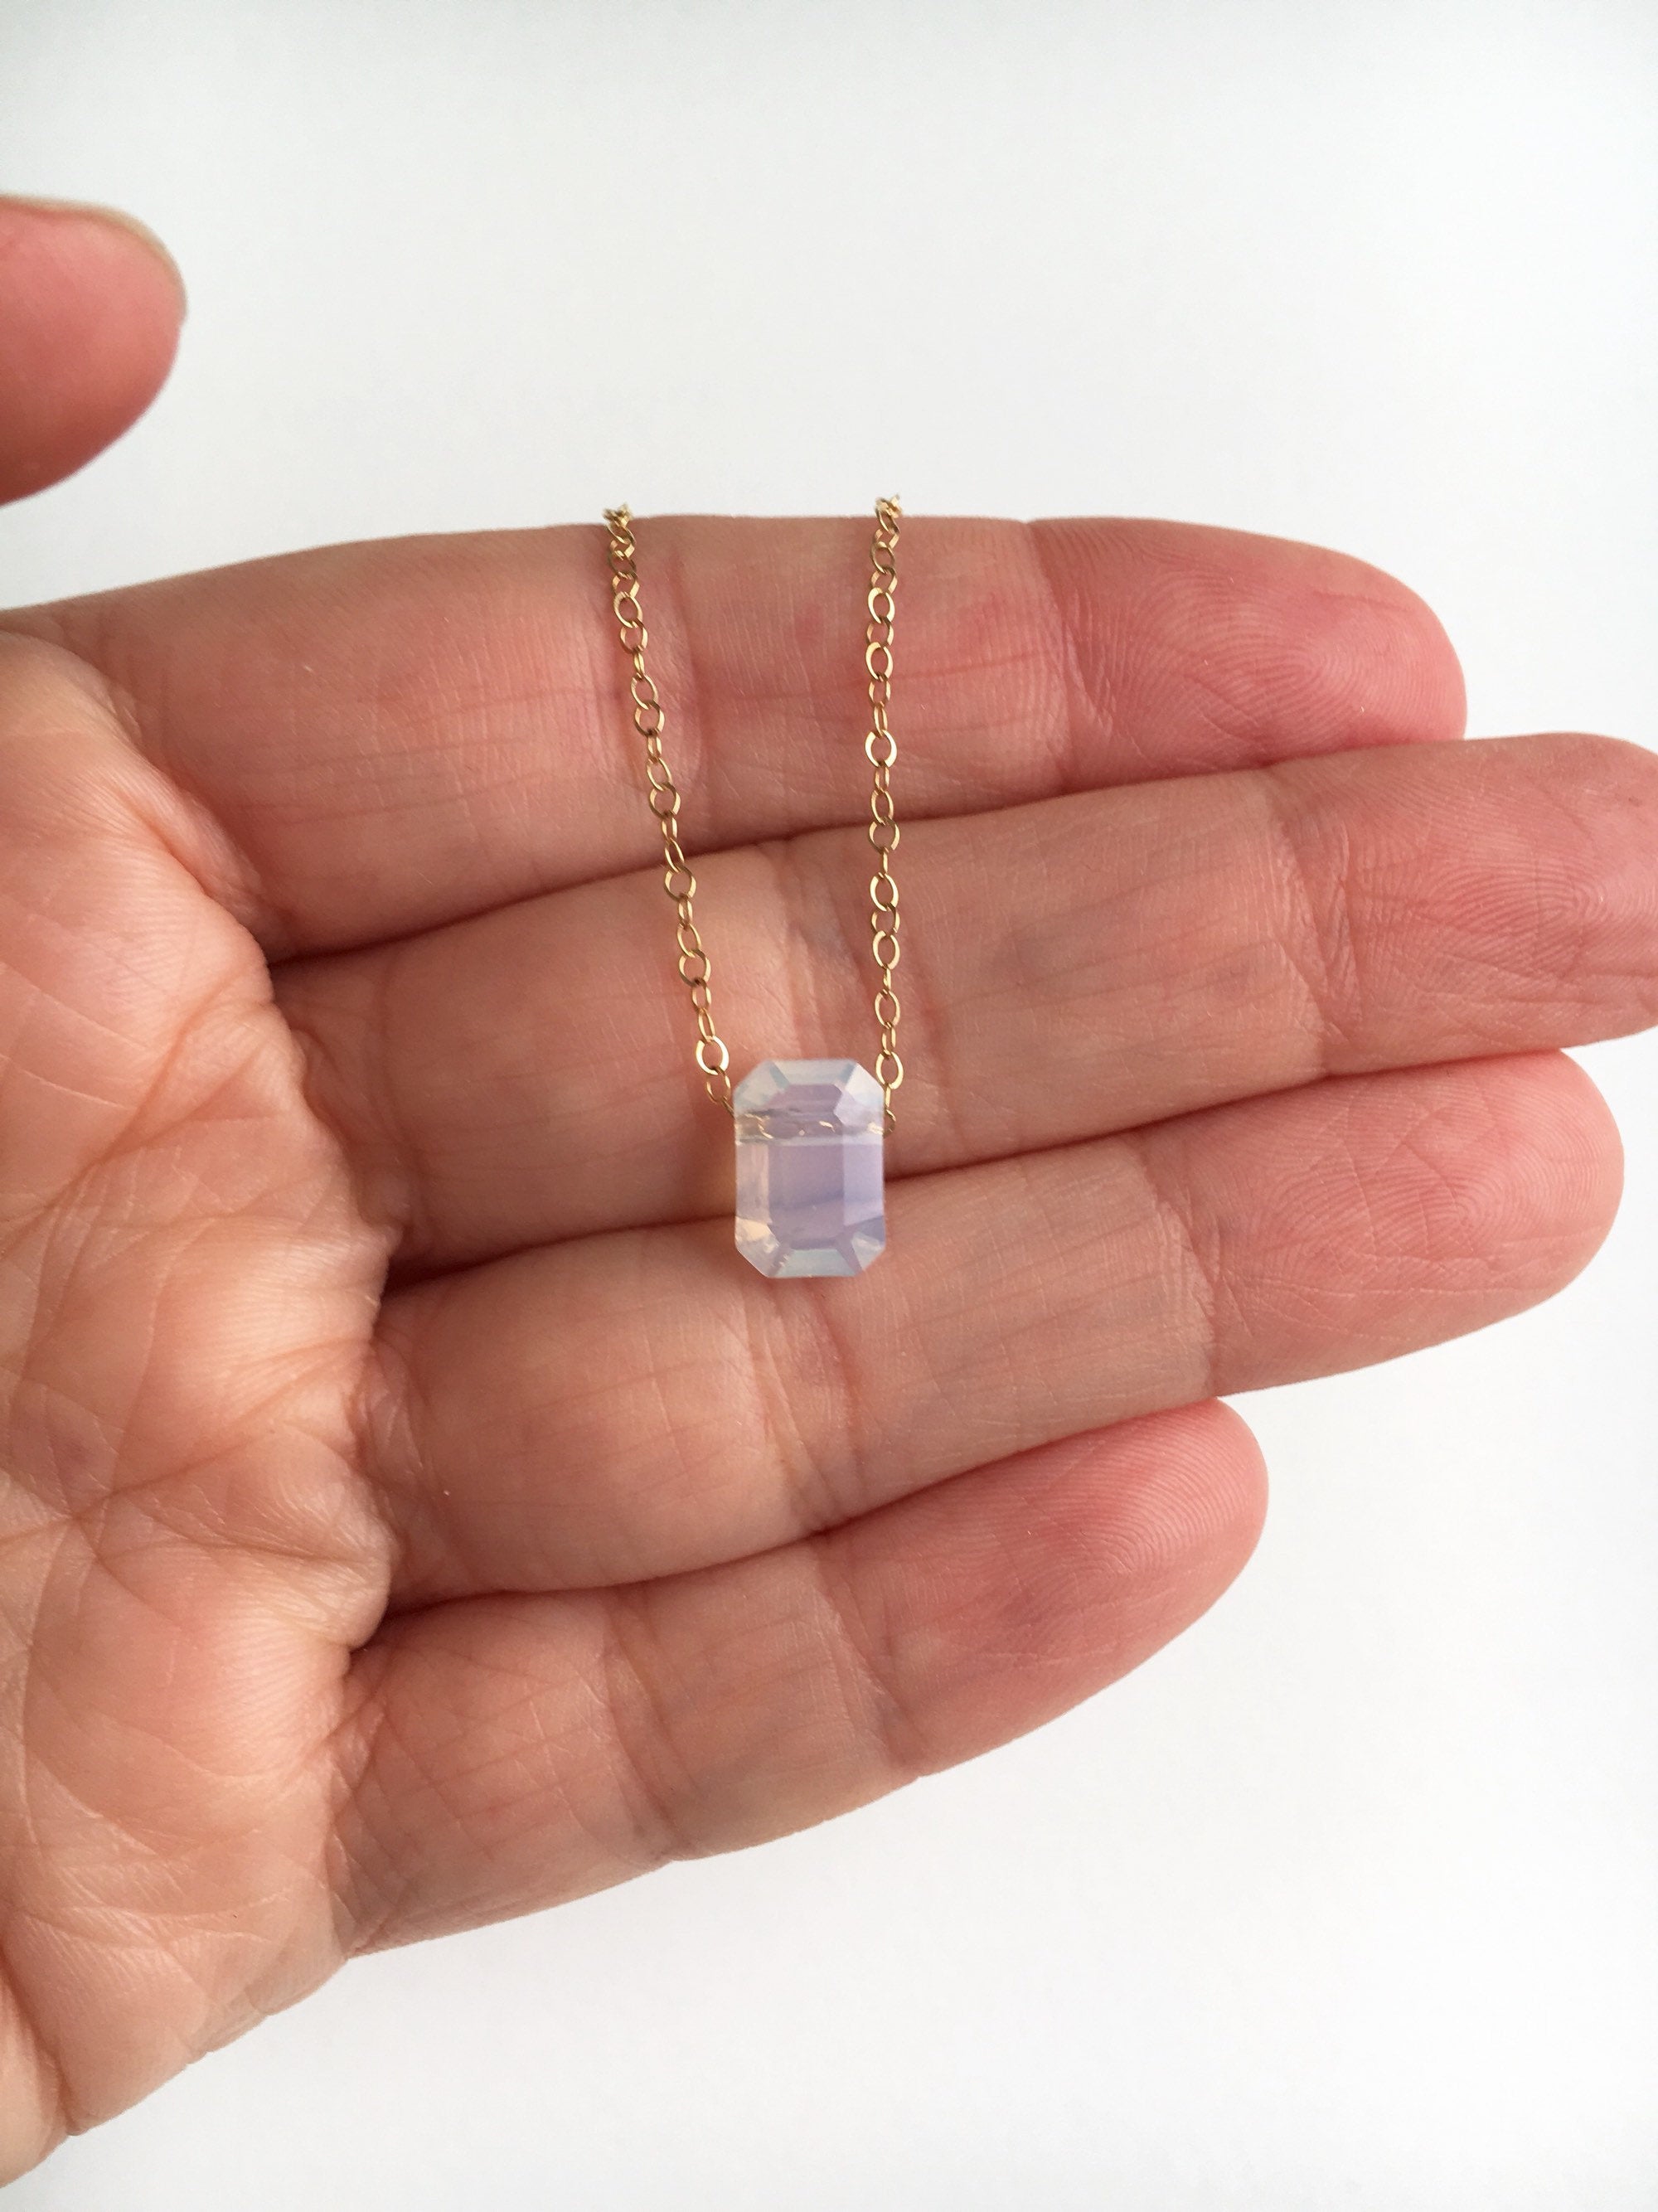 white opal octagon pendant on gold chain displayed on hand